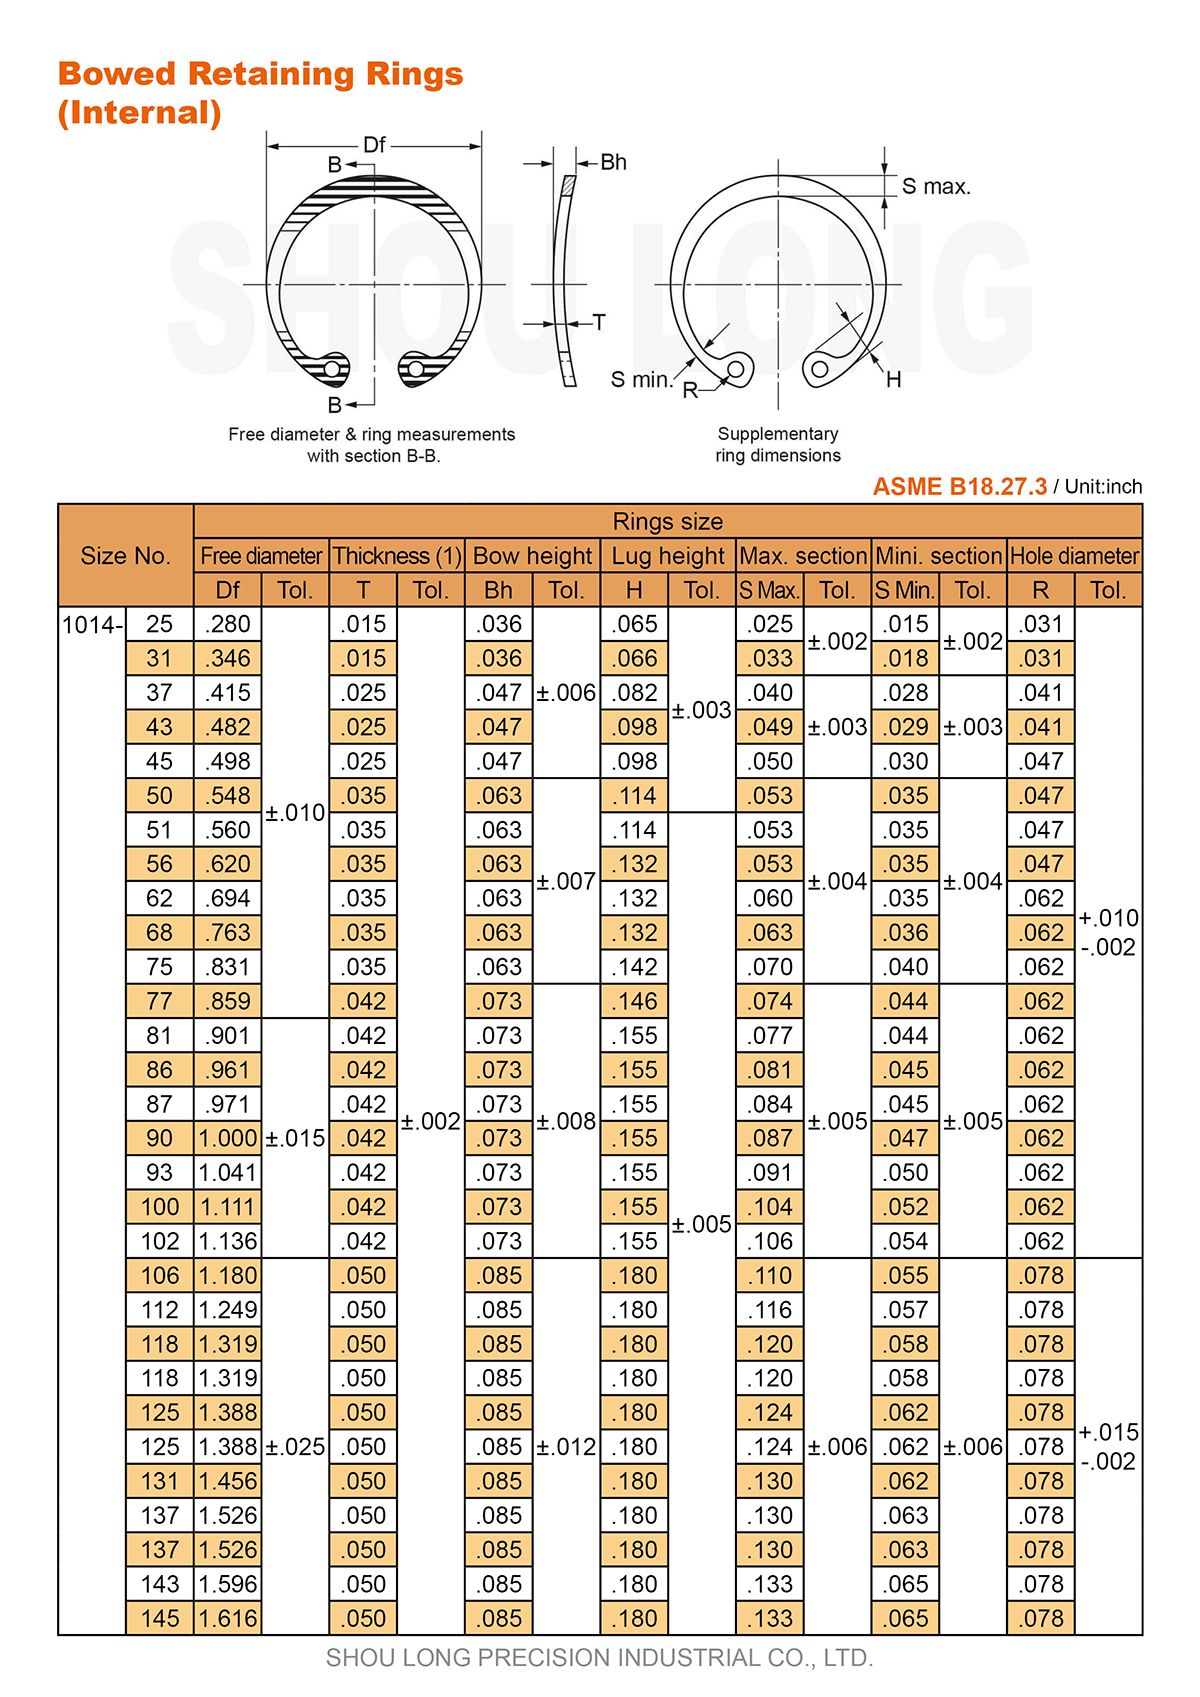 Spec of Inch Bowed Retaining Rings for Bores ASME/ANSI B18.27.3-1